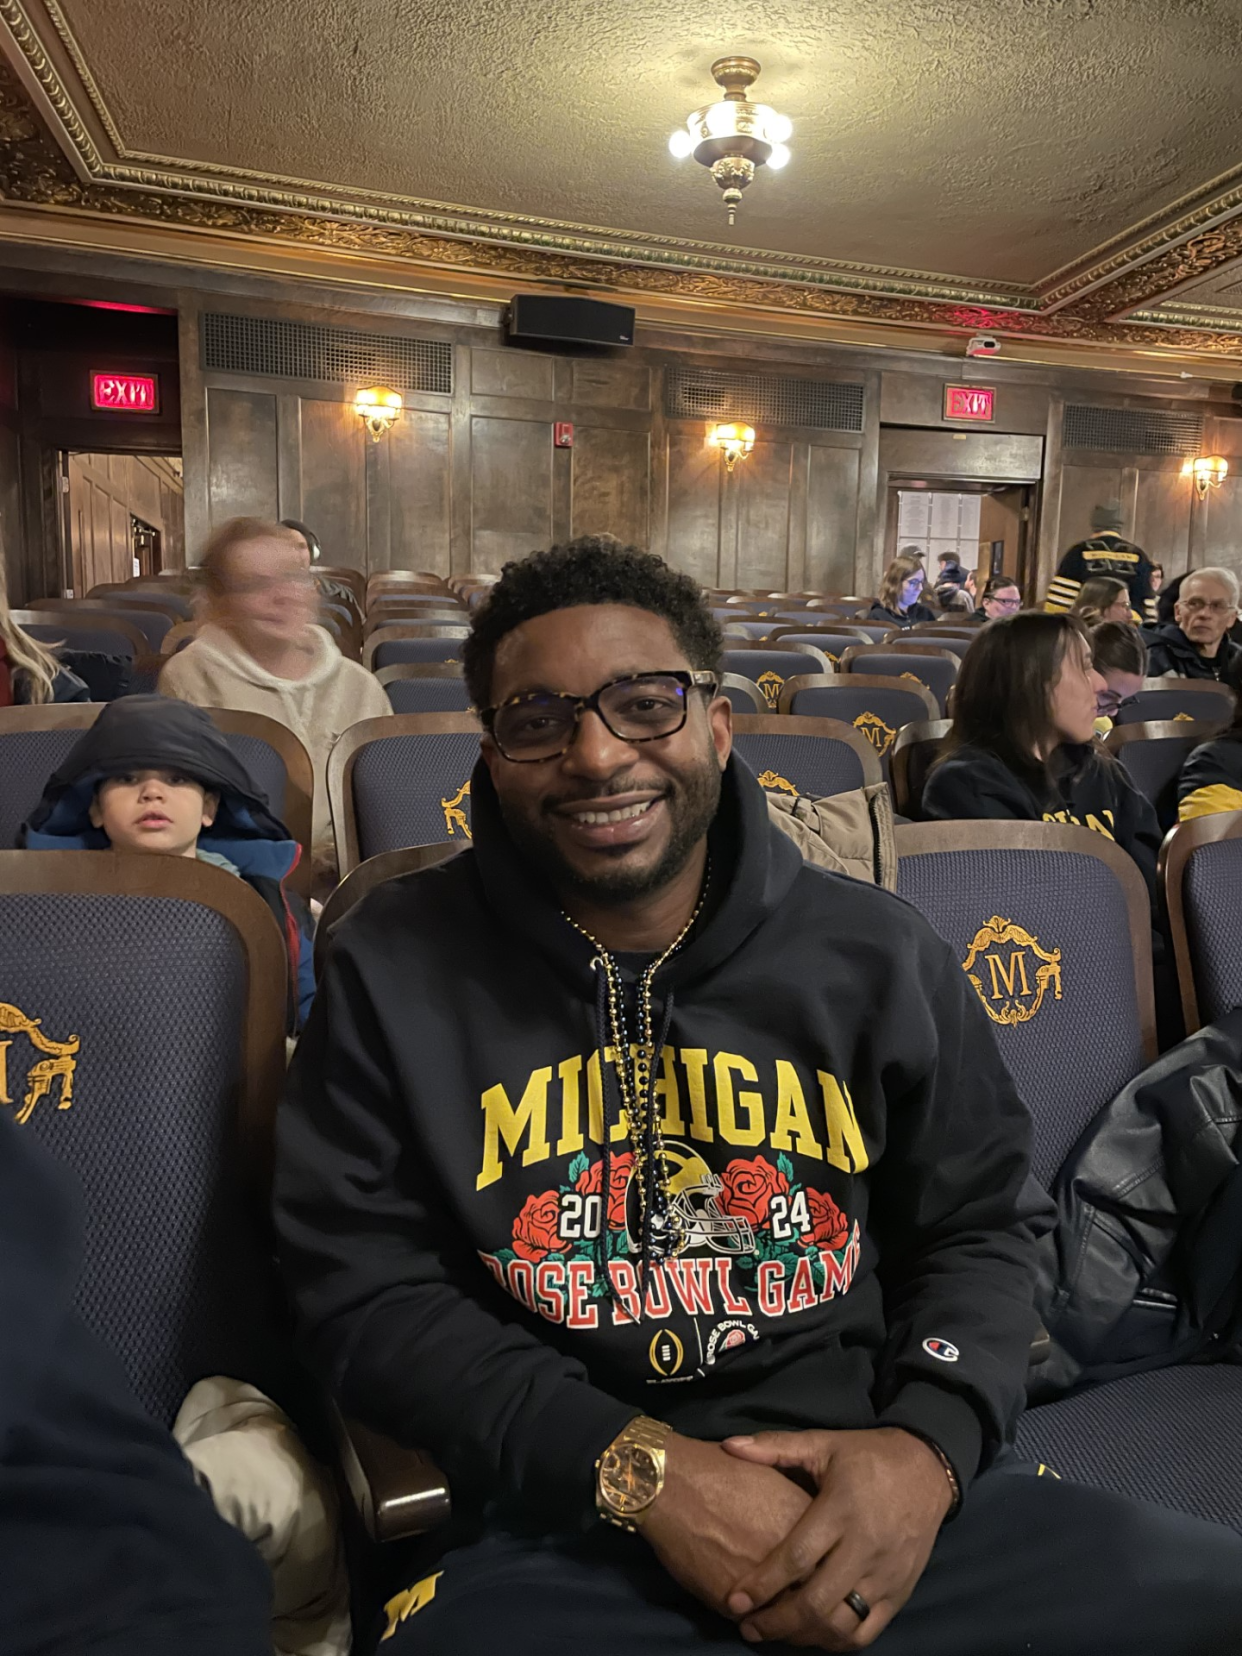 Tu’Rone Elliott, 44, of Westland, said he decided to watch the championship game from The Michigan Theater to be part of history.